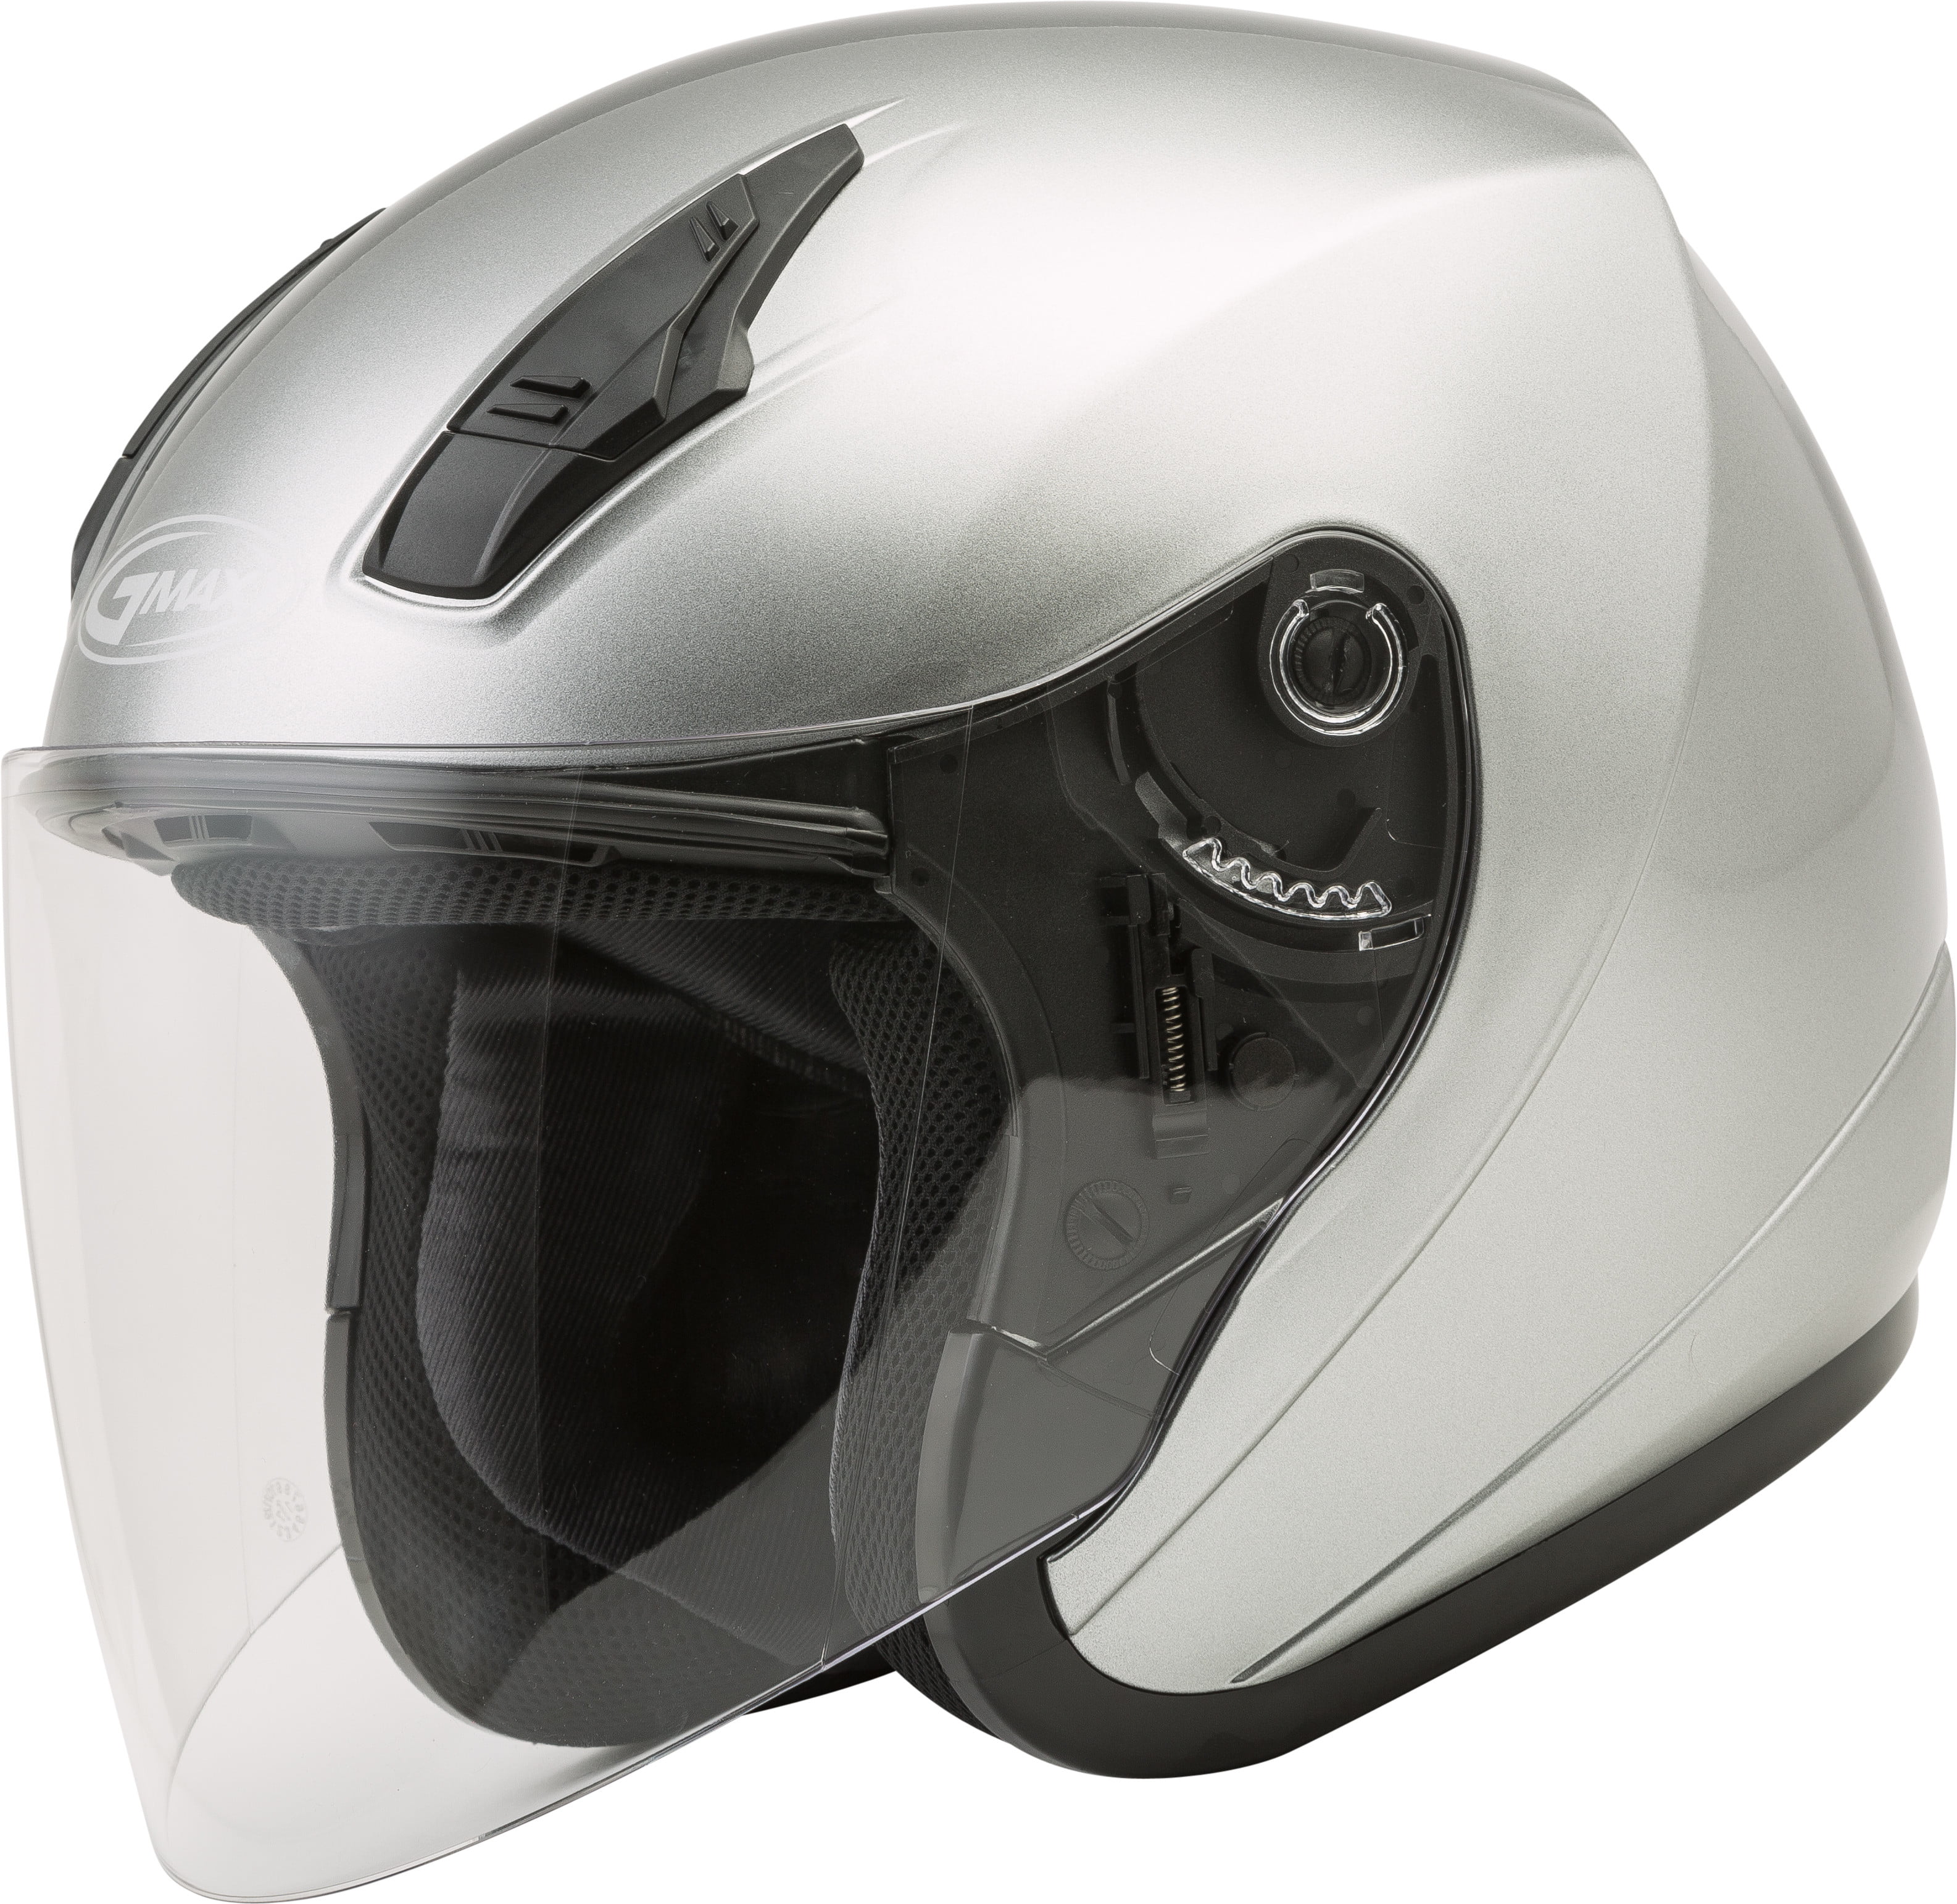 3X-Large GMAX OF-77 Adult Downey Open-Face Motorcycle Helmet Matte Grey/Silver